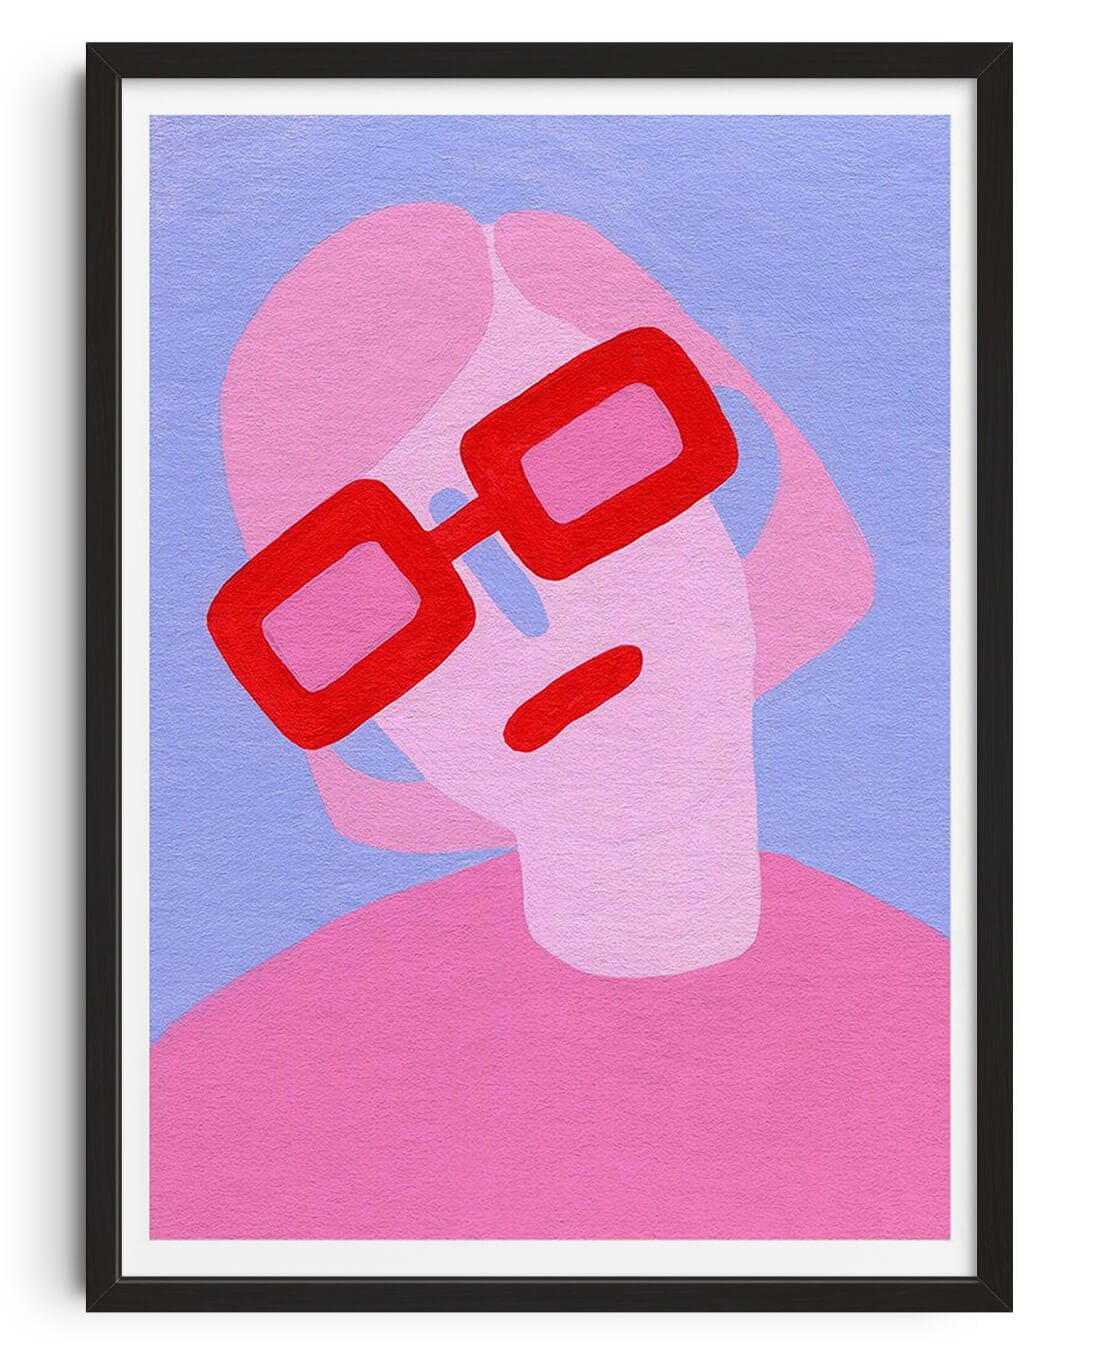 Sunglasses by Kissi Ussuki contemporary wall art print from DROOL